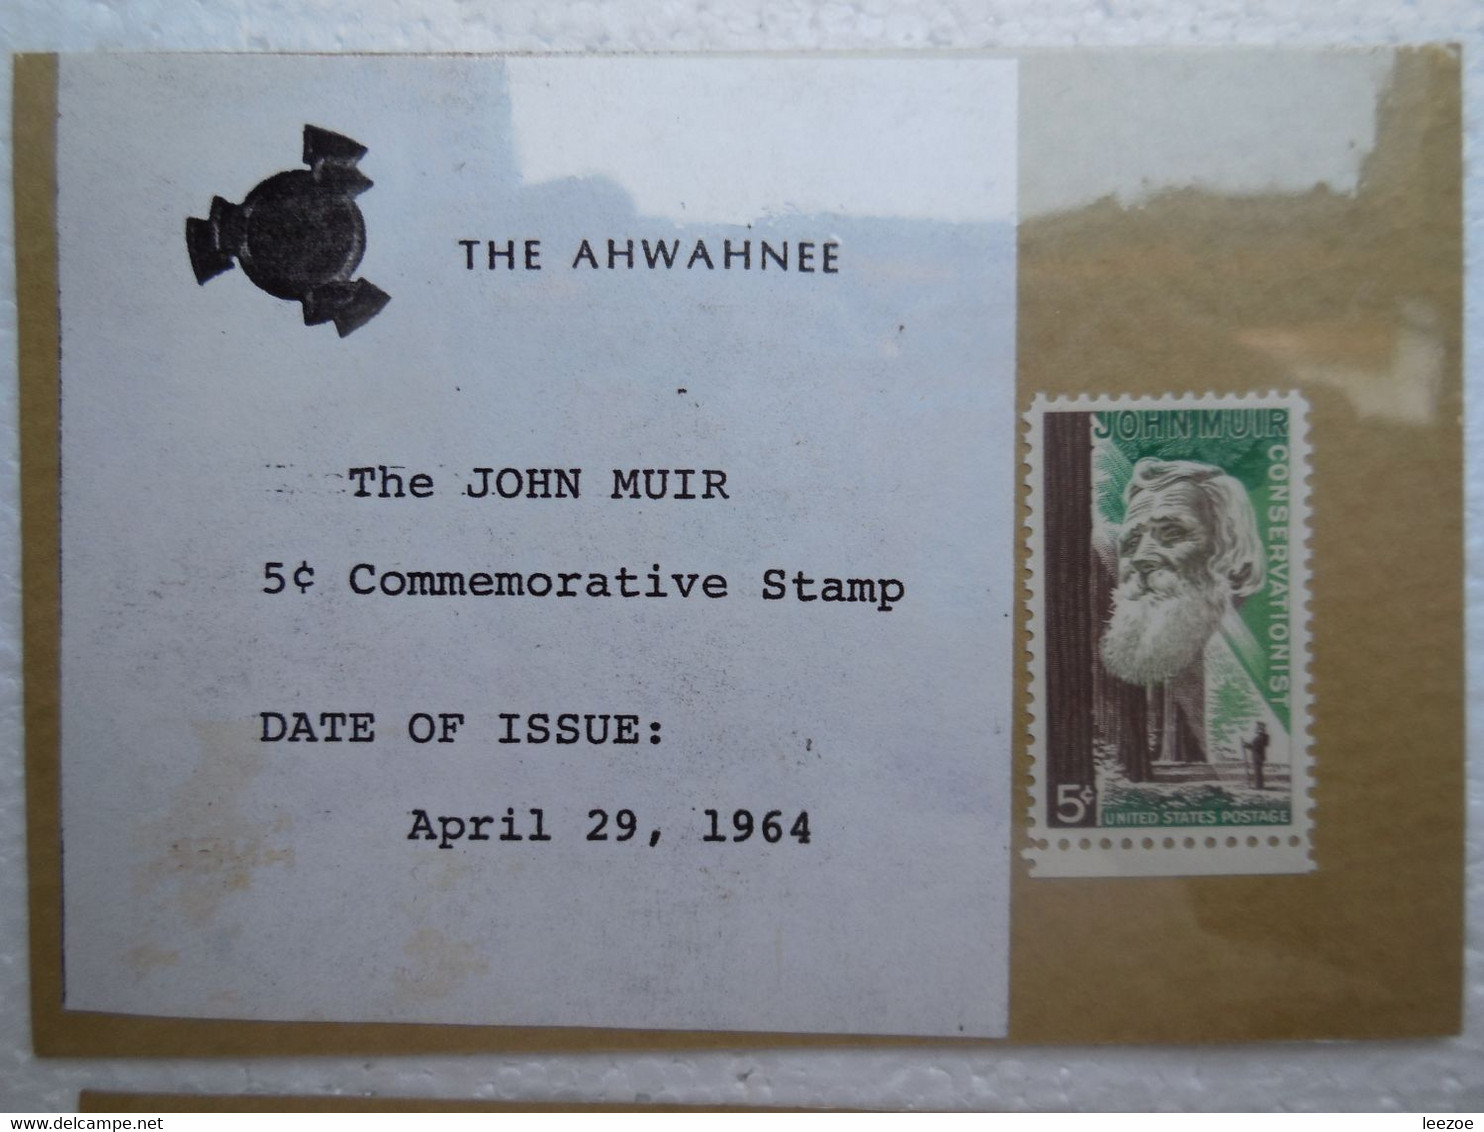 TIMBRES, STAMP USA, NATIONAL PARKS PASSPORT SERIES + THE AHWAHNEE 5c JOHN MUIR COMMEMORATIVE